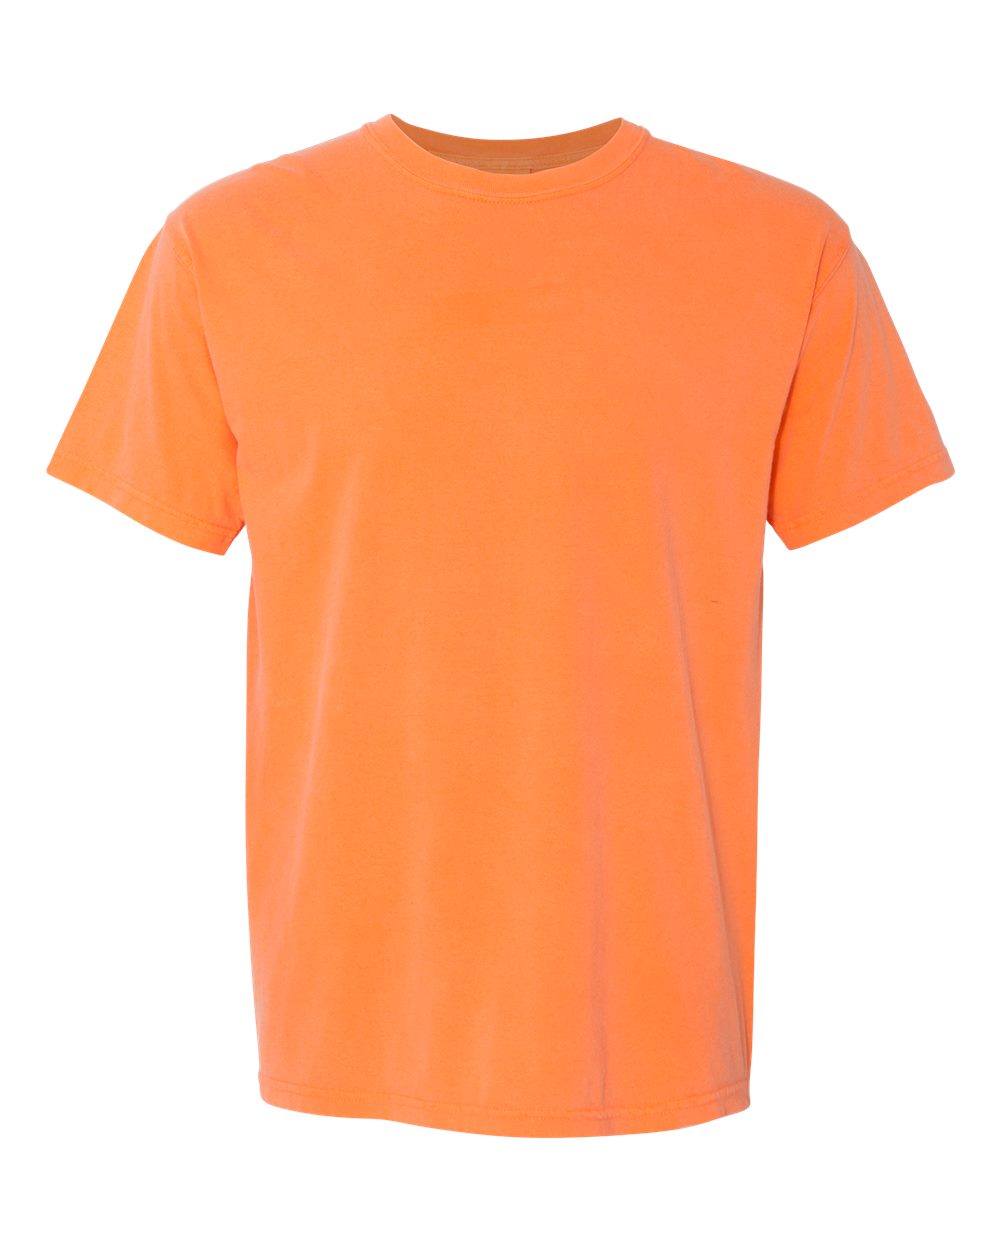 Comfort Colors Garment-Dyed Tee (1717) in Melon